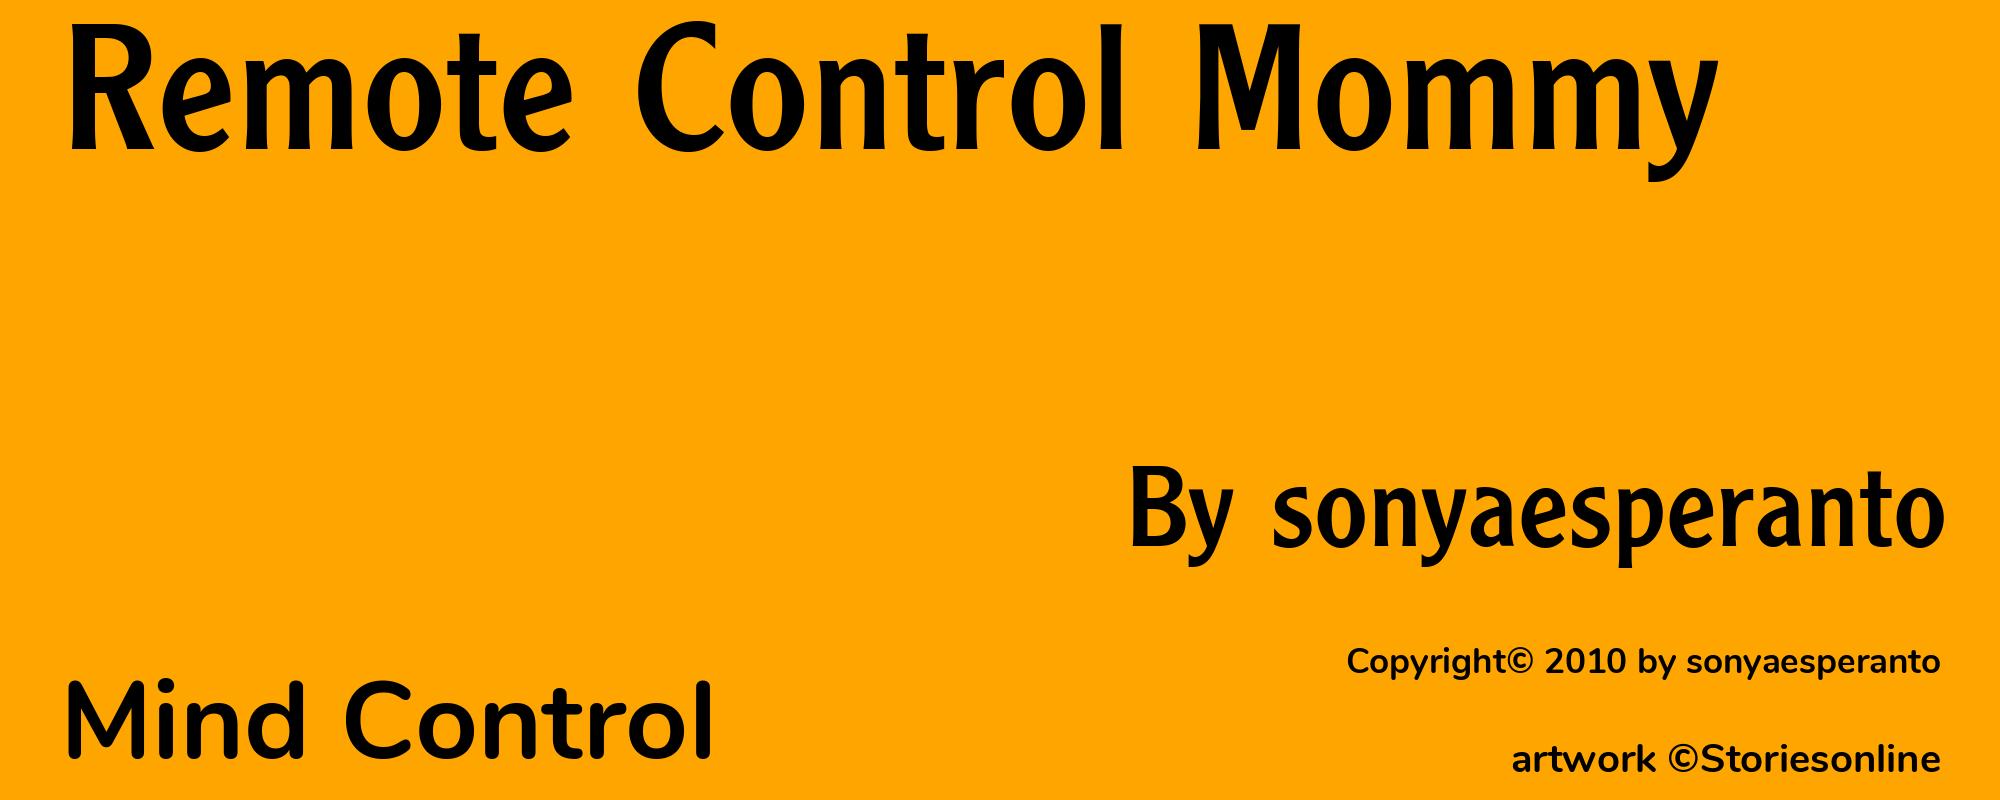 Remote Control Mommy - Cover